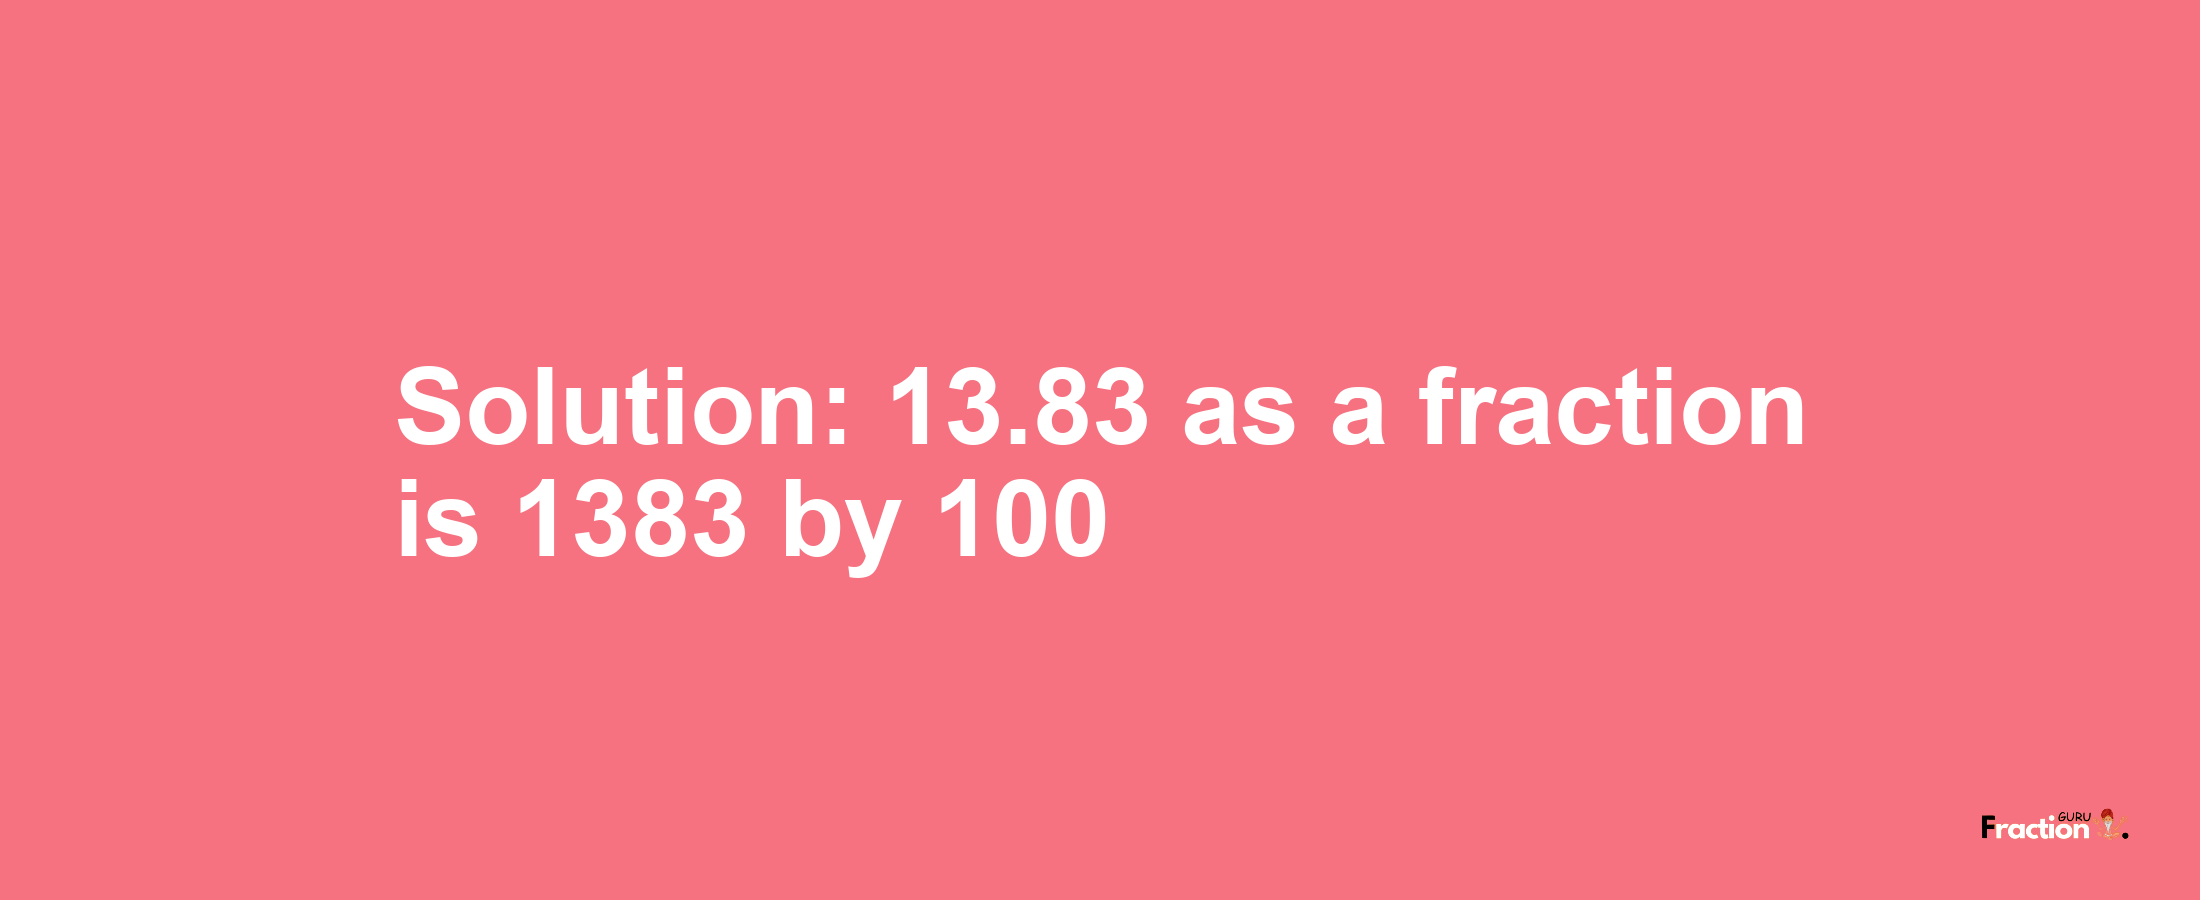 Solution:13.83 as a fraction is 1383/100